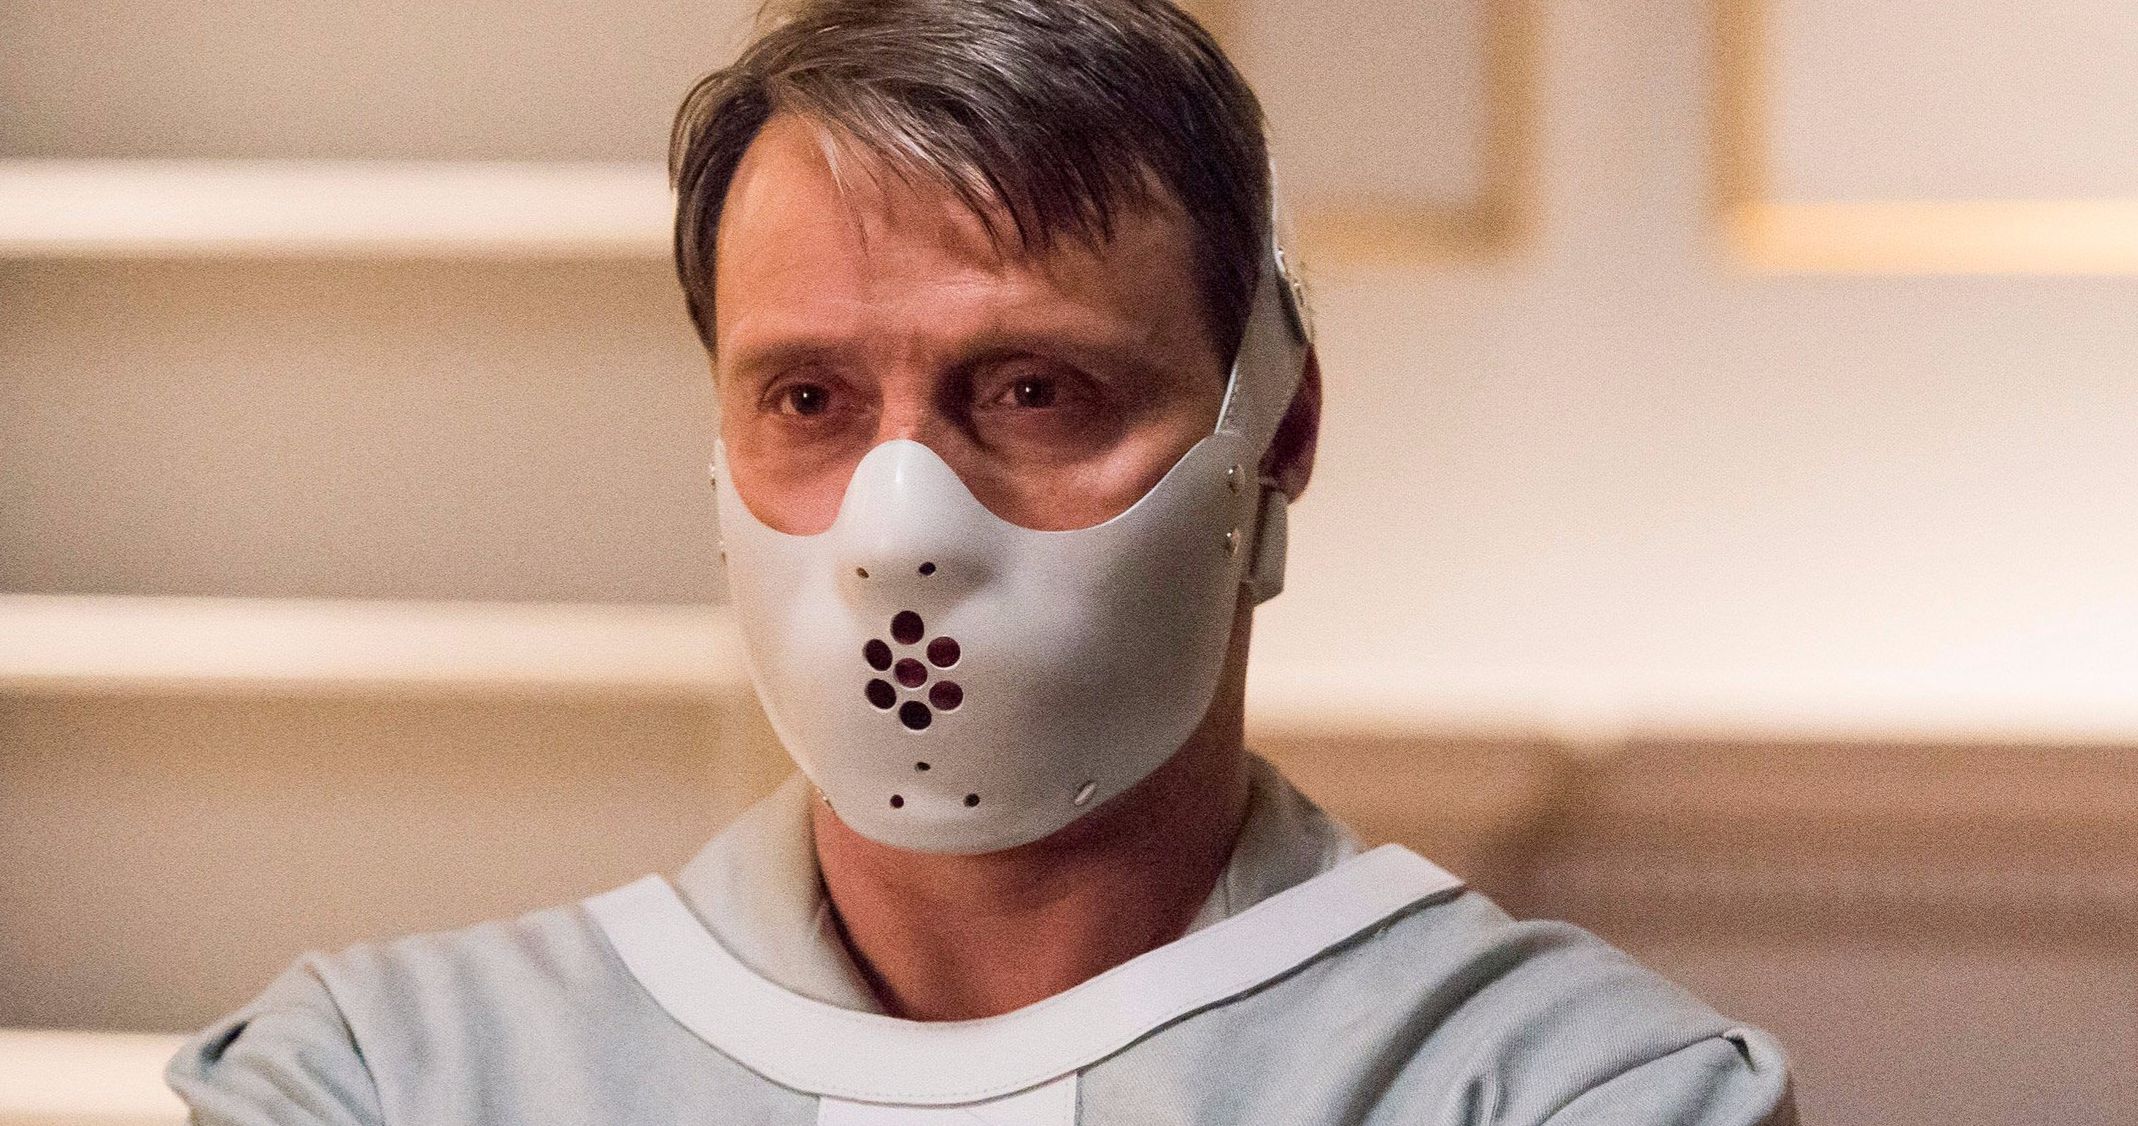 What's Holding Back the Hannibal Revival Series or Possible Reunion Movie?